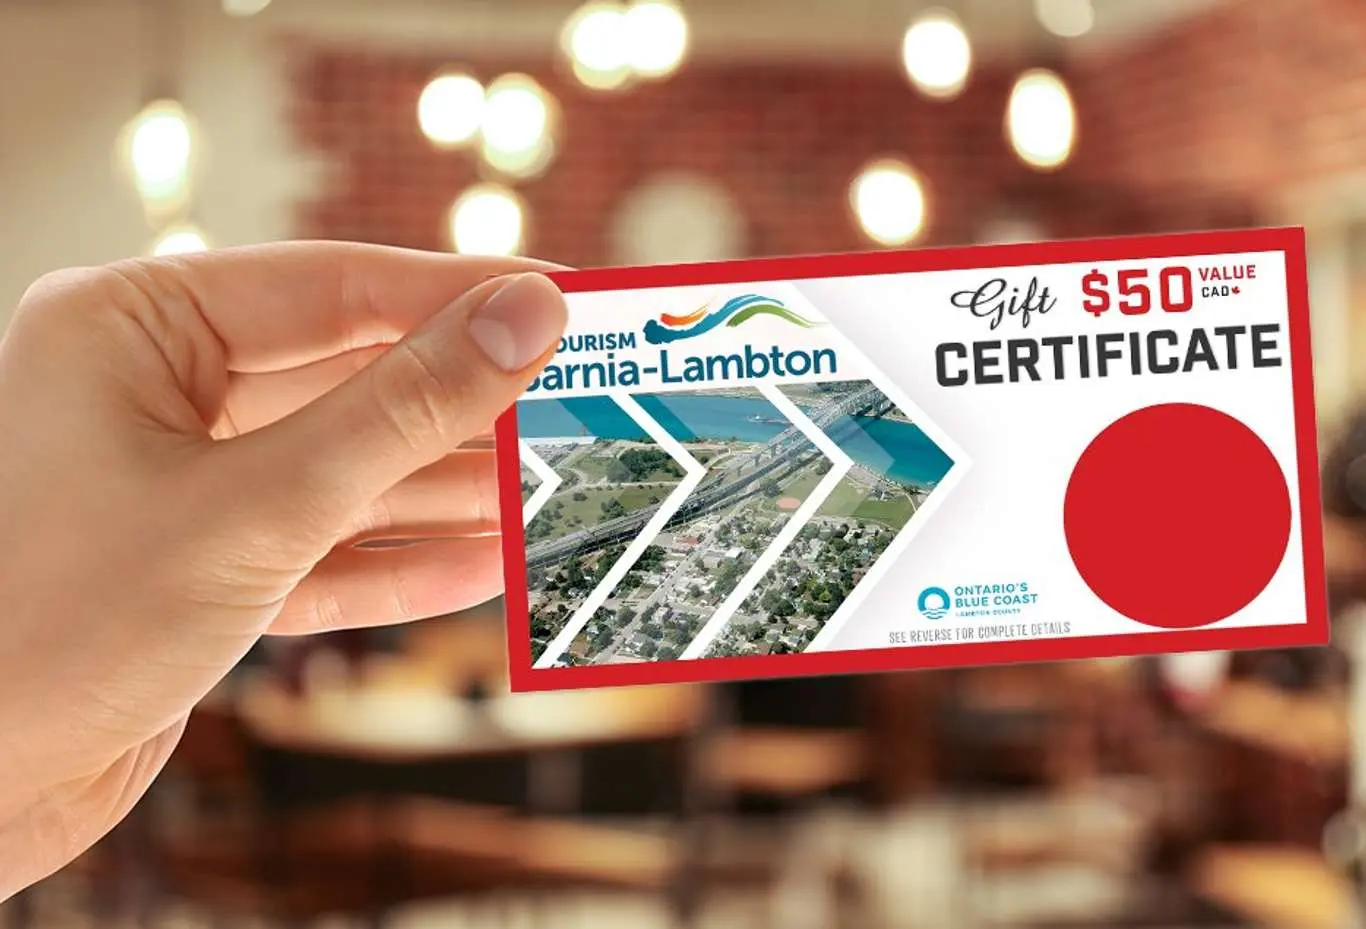 A hand holding out a Tourism Sarnia-Lambton gift certificate